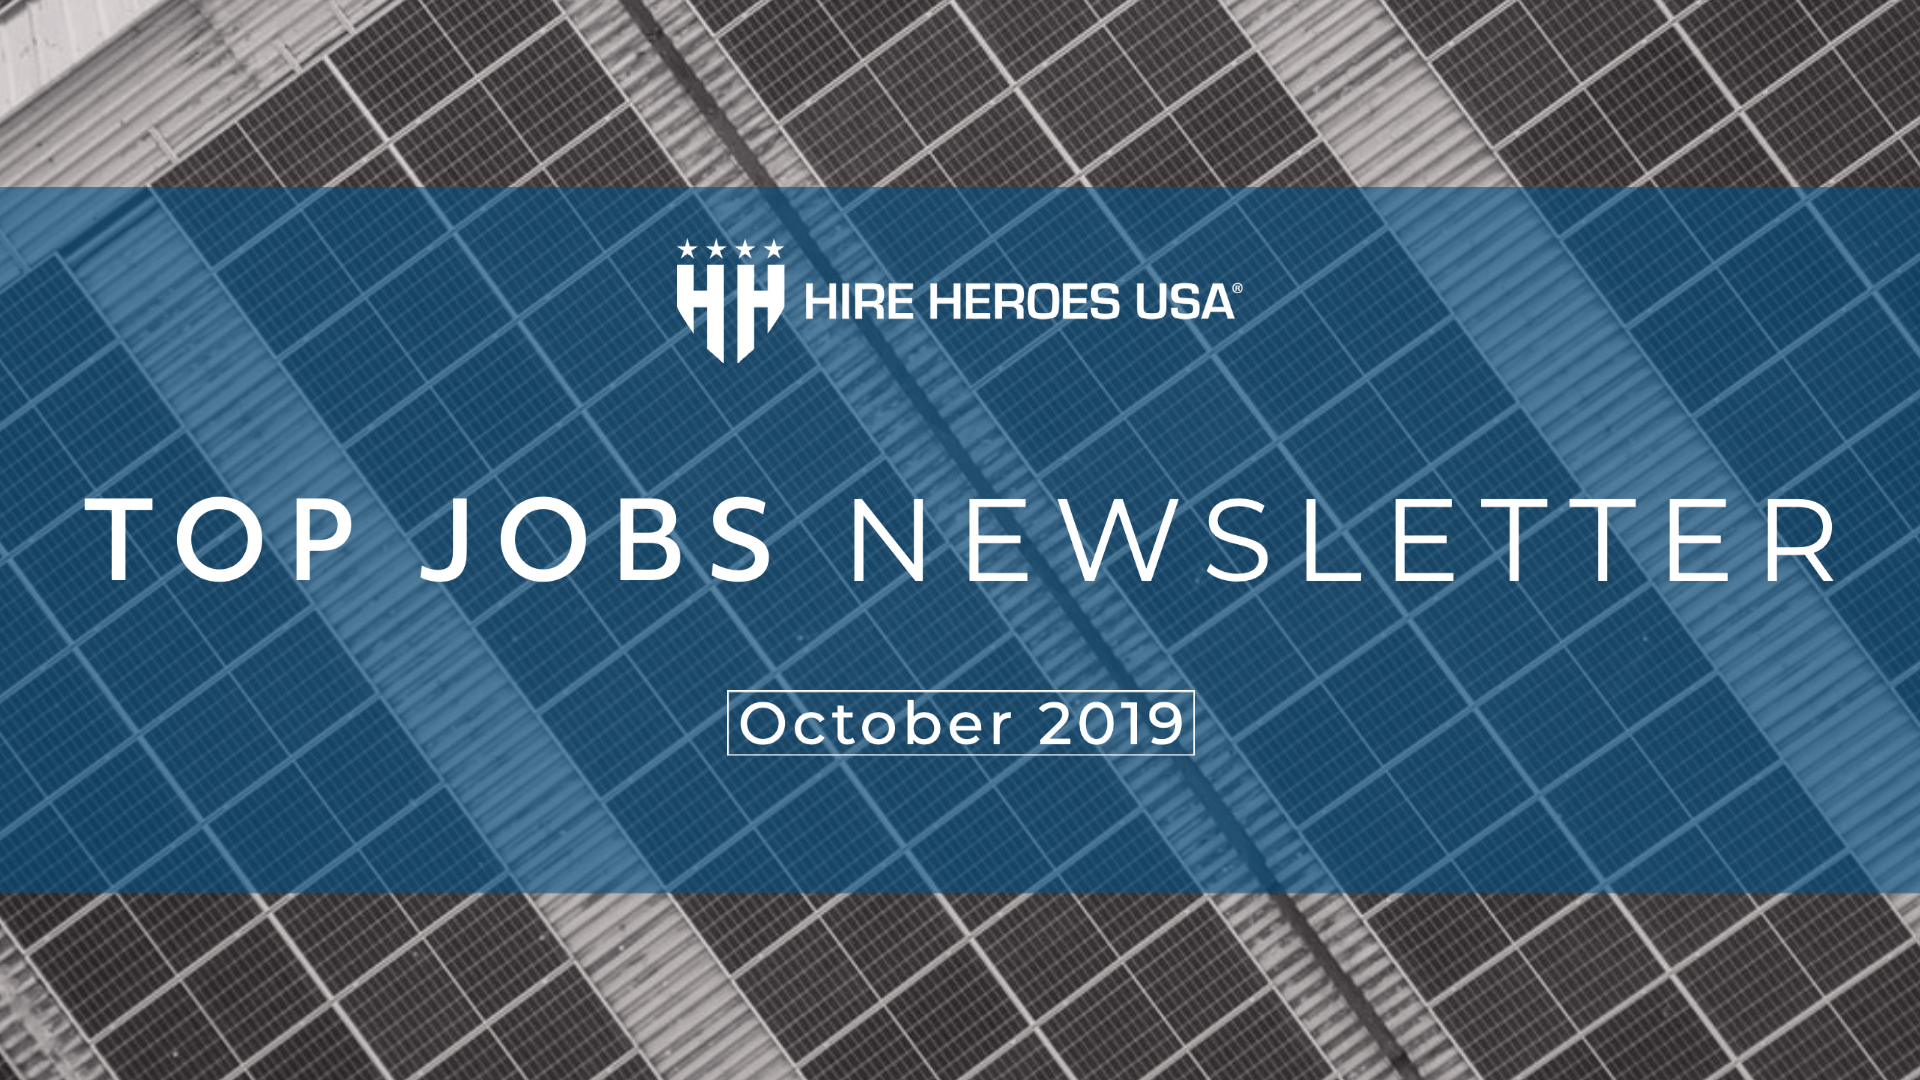 Top Jobs for the month of October 2019